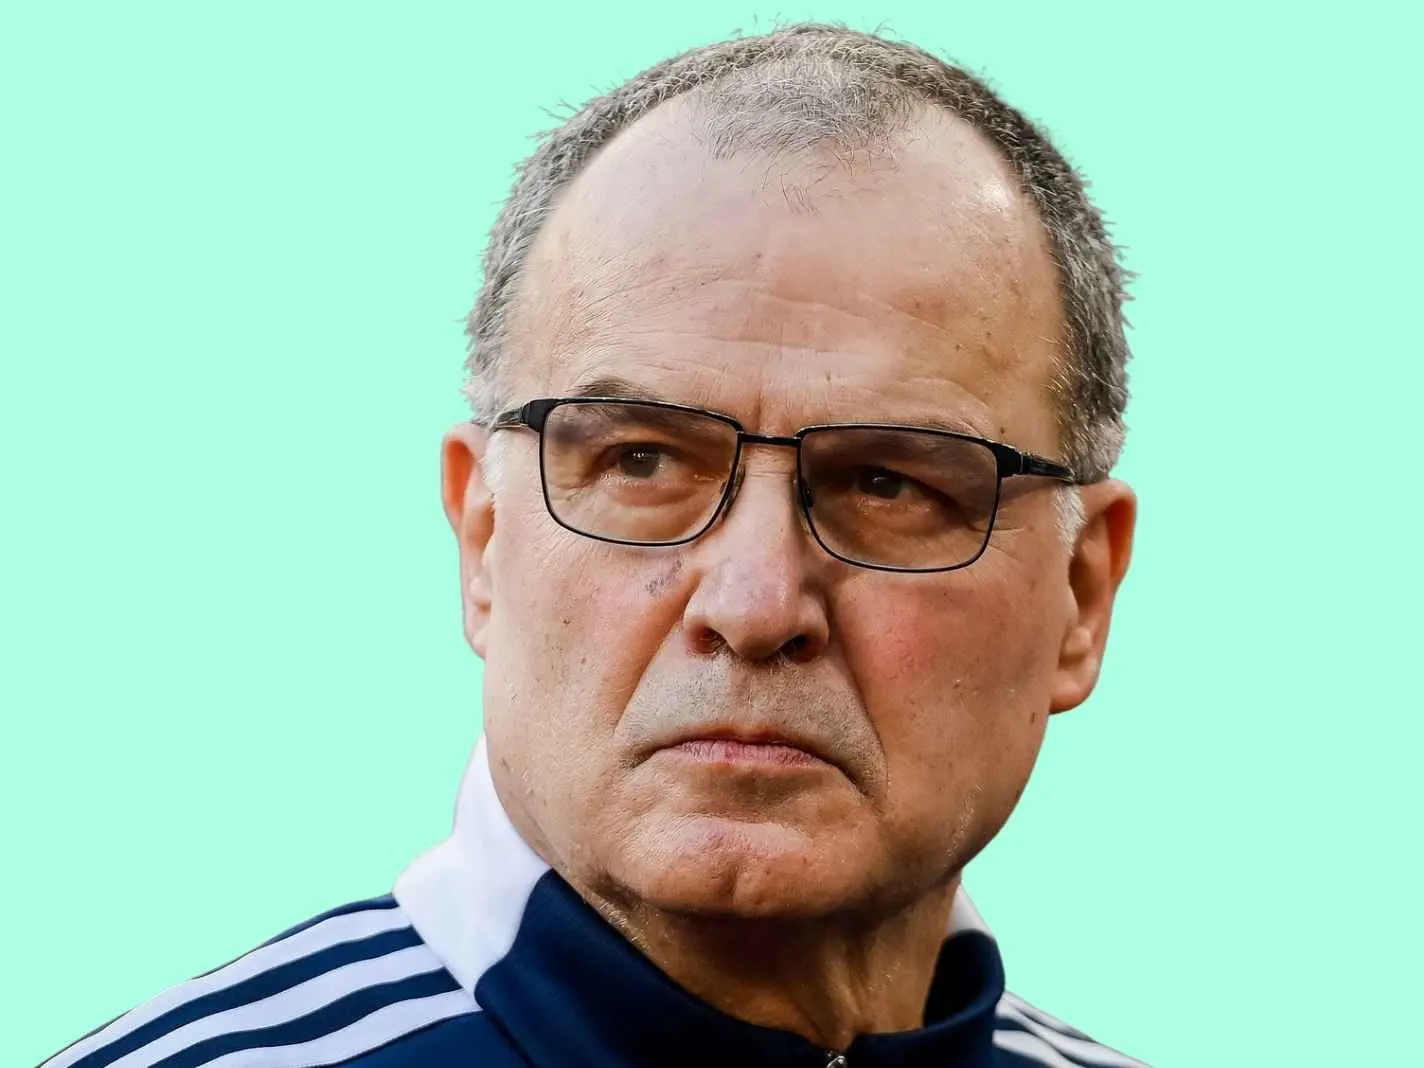 Marcelo Bielsa has been sacked as Leeds manager following poor results